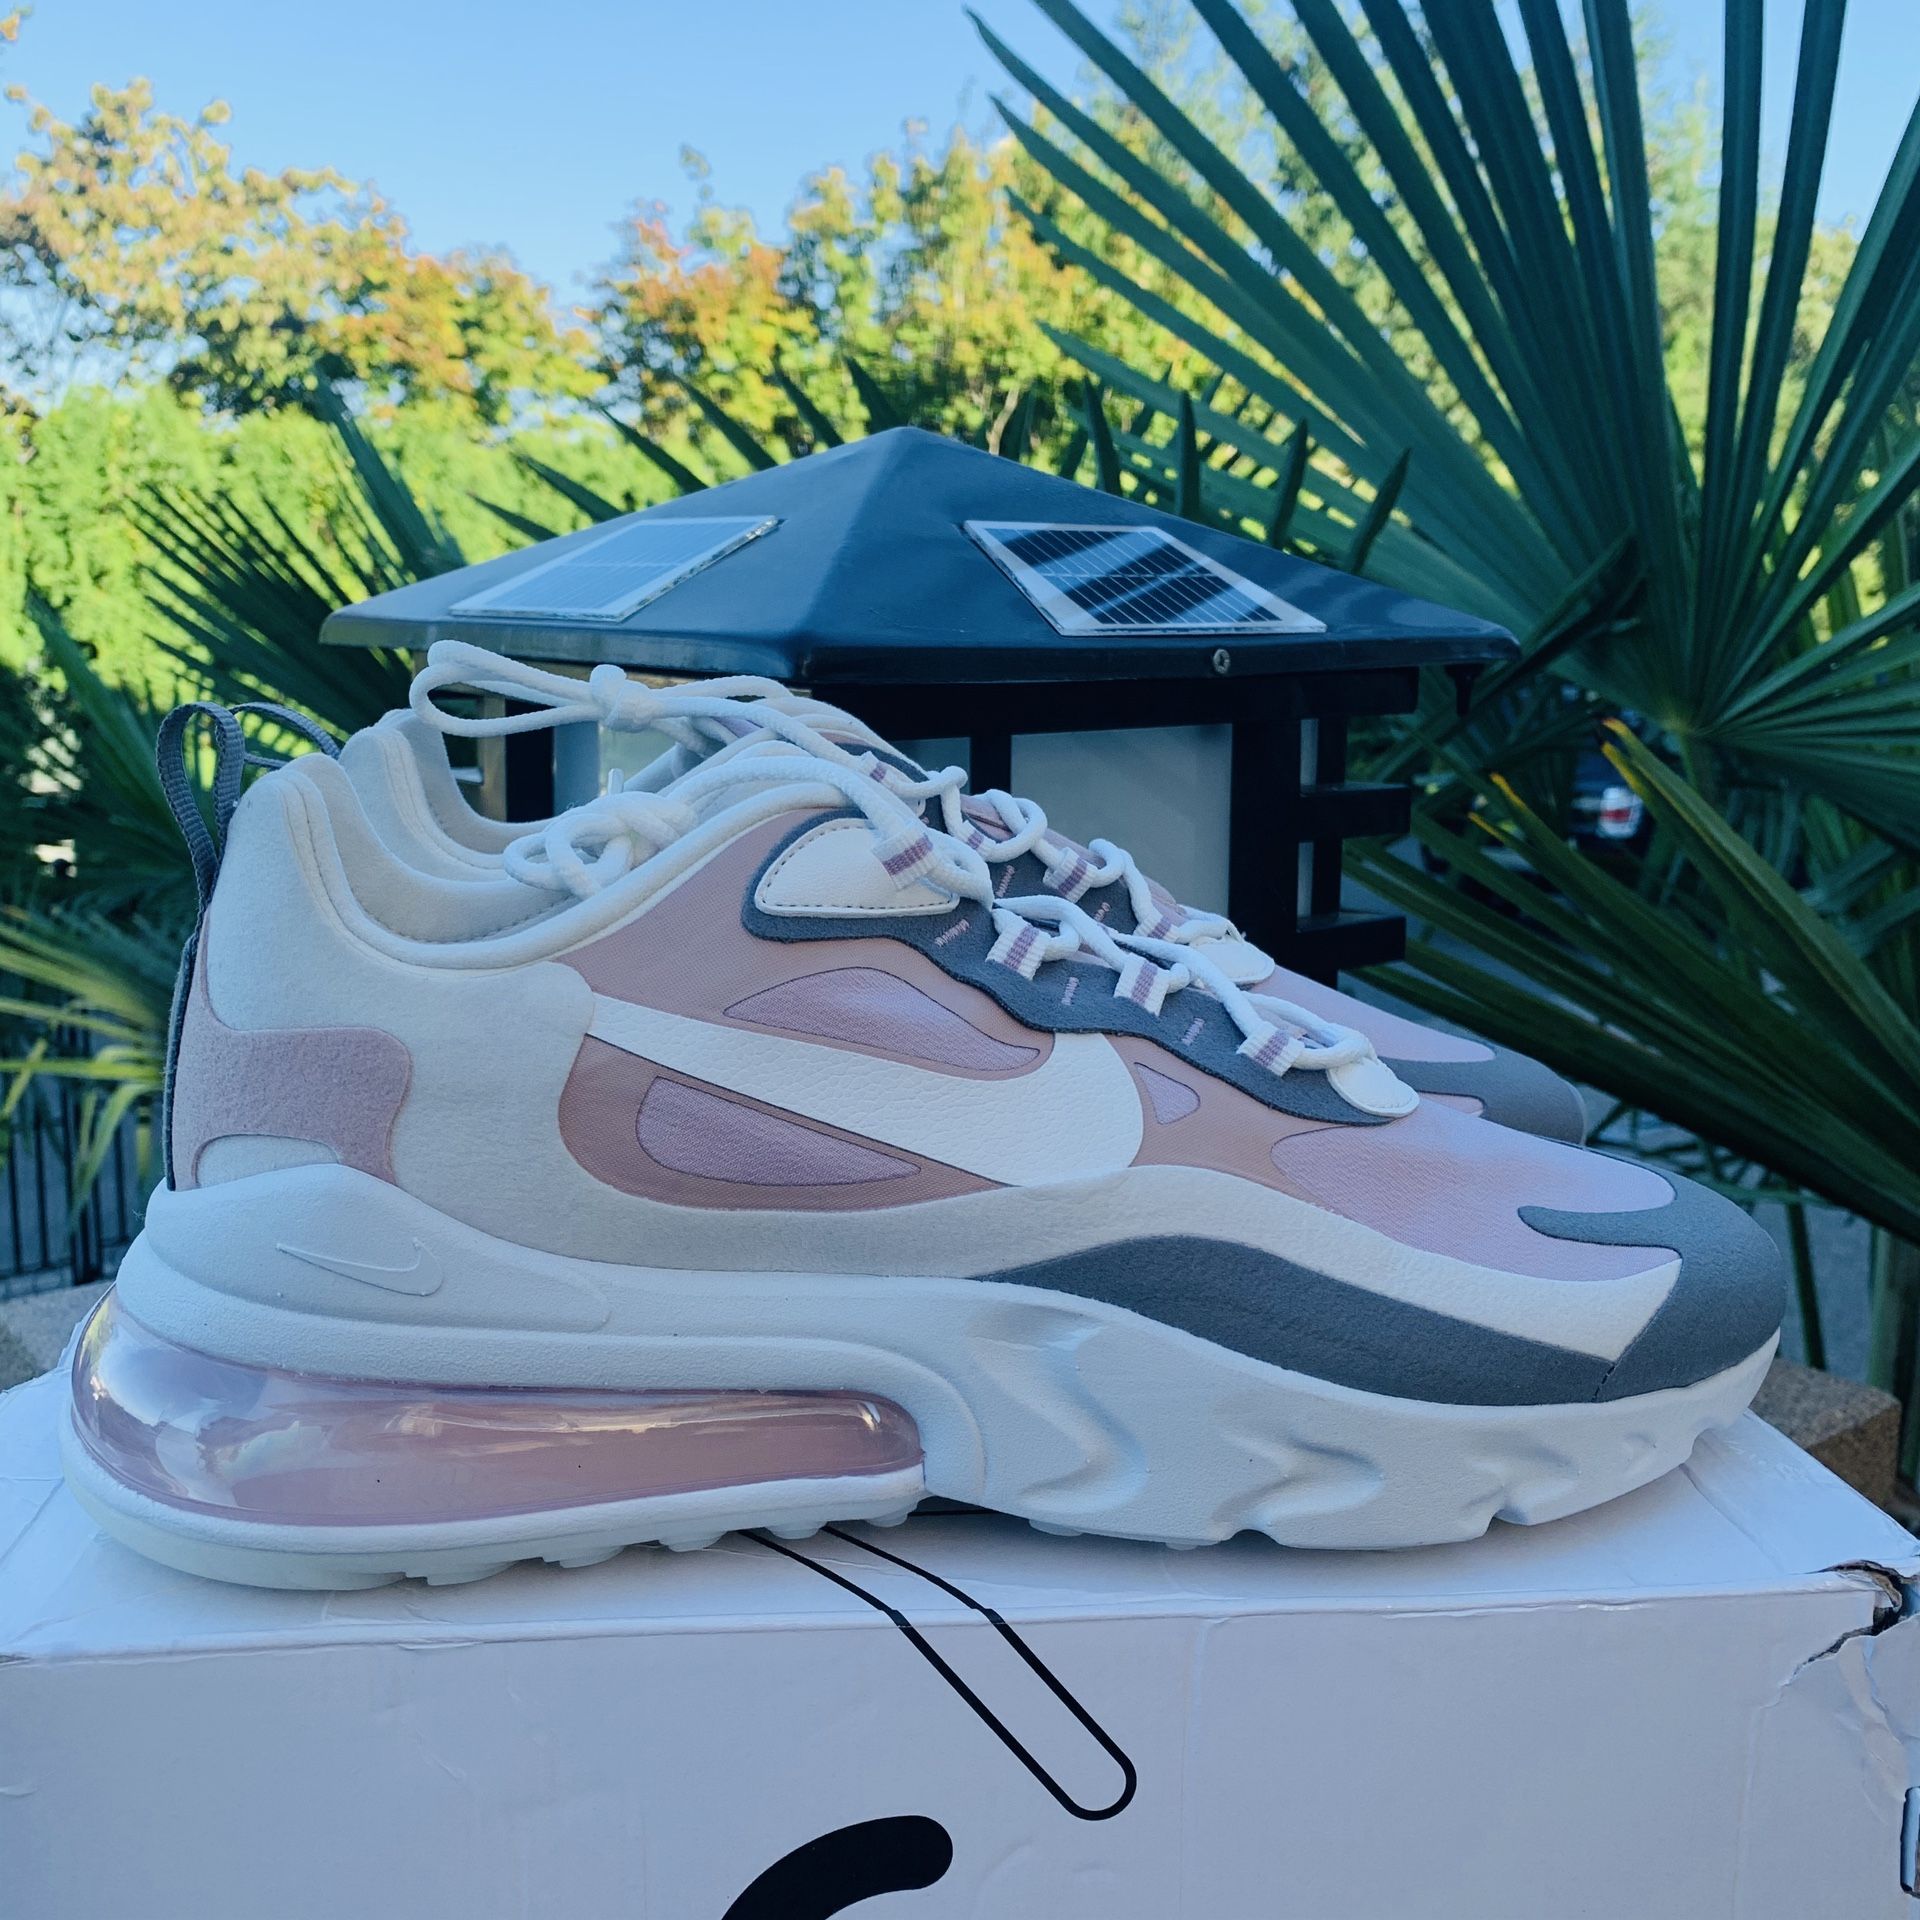 Nike air max women’s size 10.5 FIRM